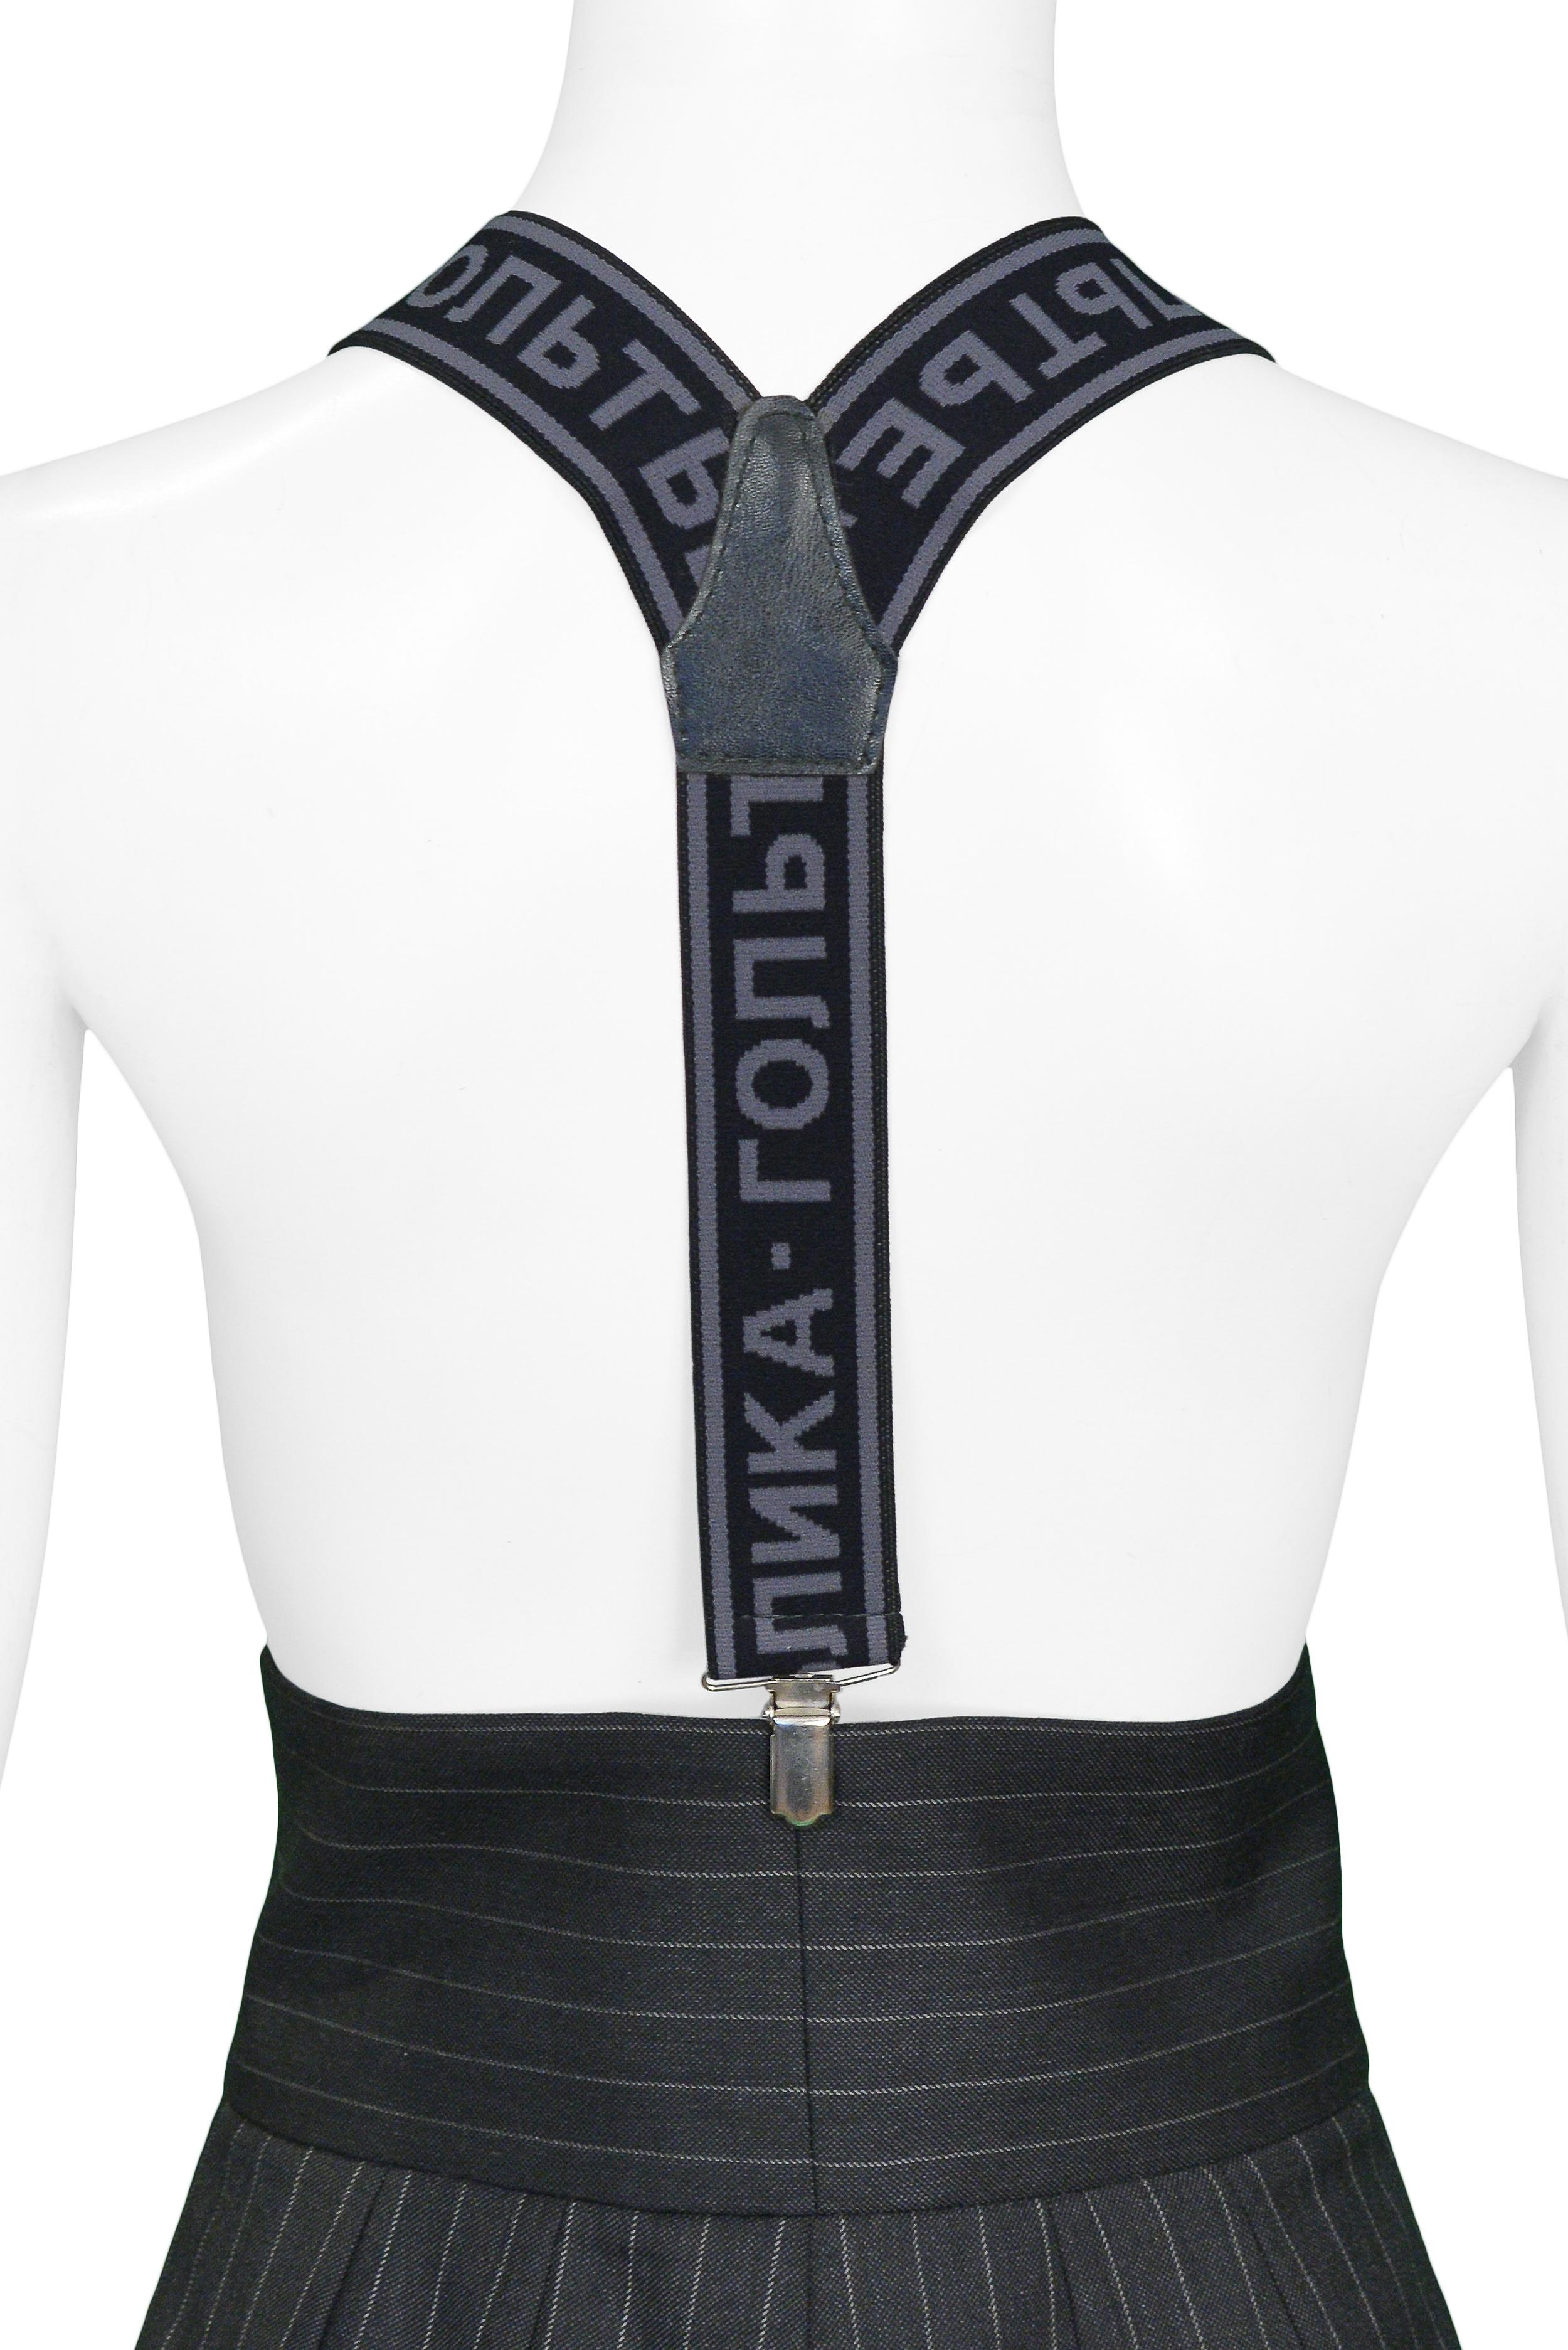 Vintage Jean Paul Gaultier black Russian Constructivist suspenders featuring grey seemingly Russian text, knickel hardare & leather detail at back. 

Excellent Condition.

Size: O/S